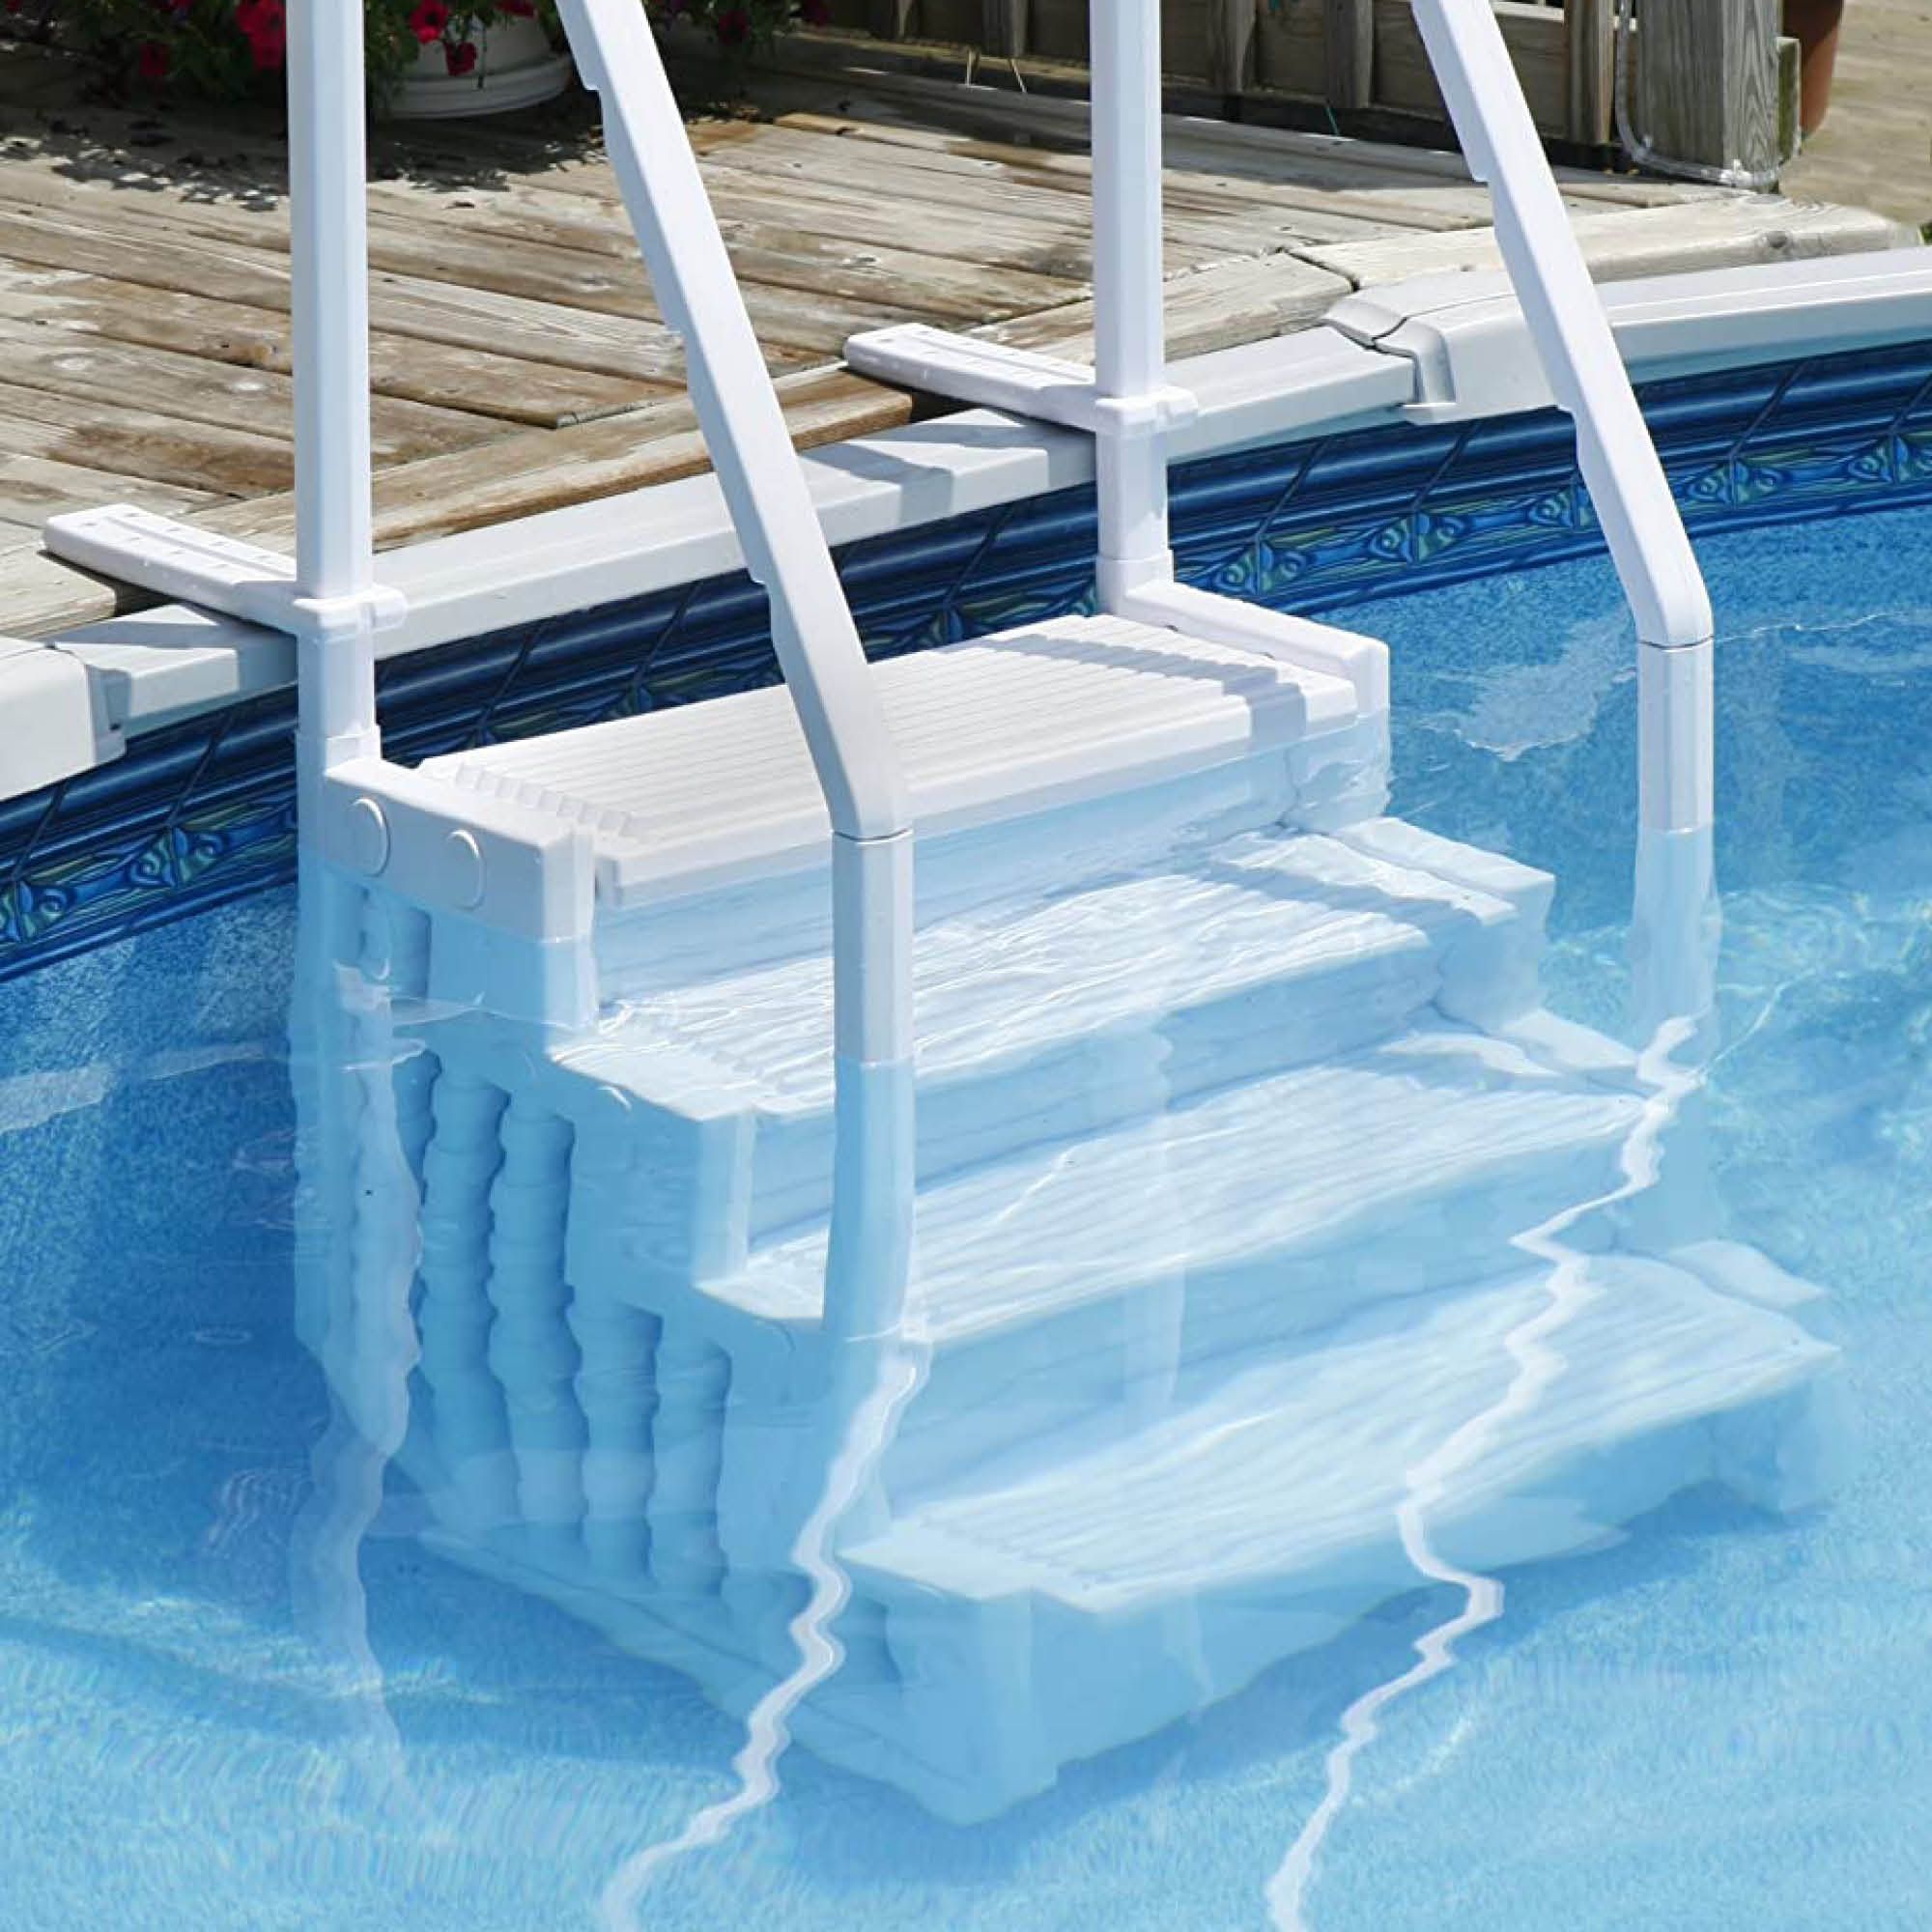 The 9 Best Pool Ladders 2021, Best Ladder For Above Ground Pool With Deck